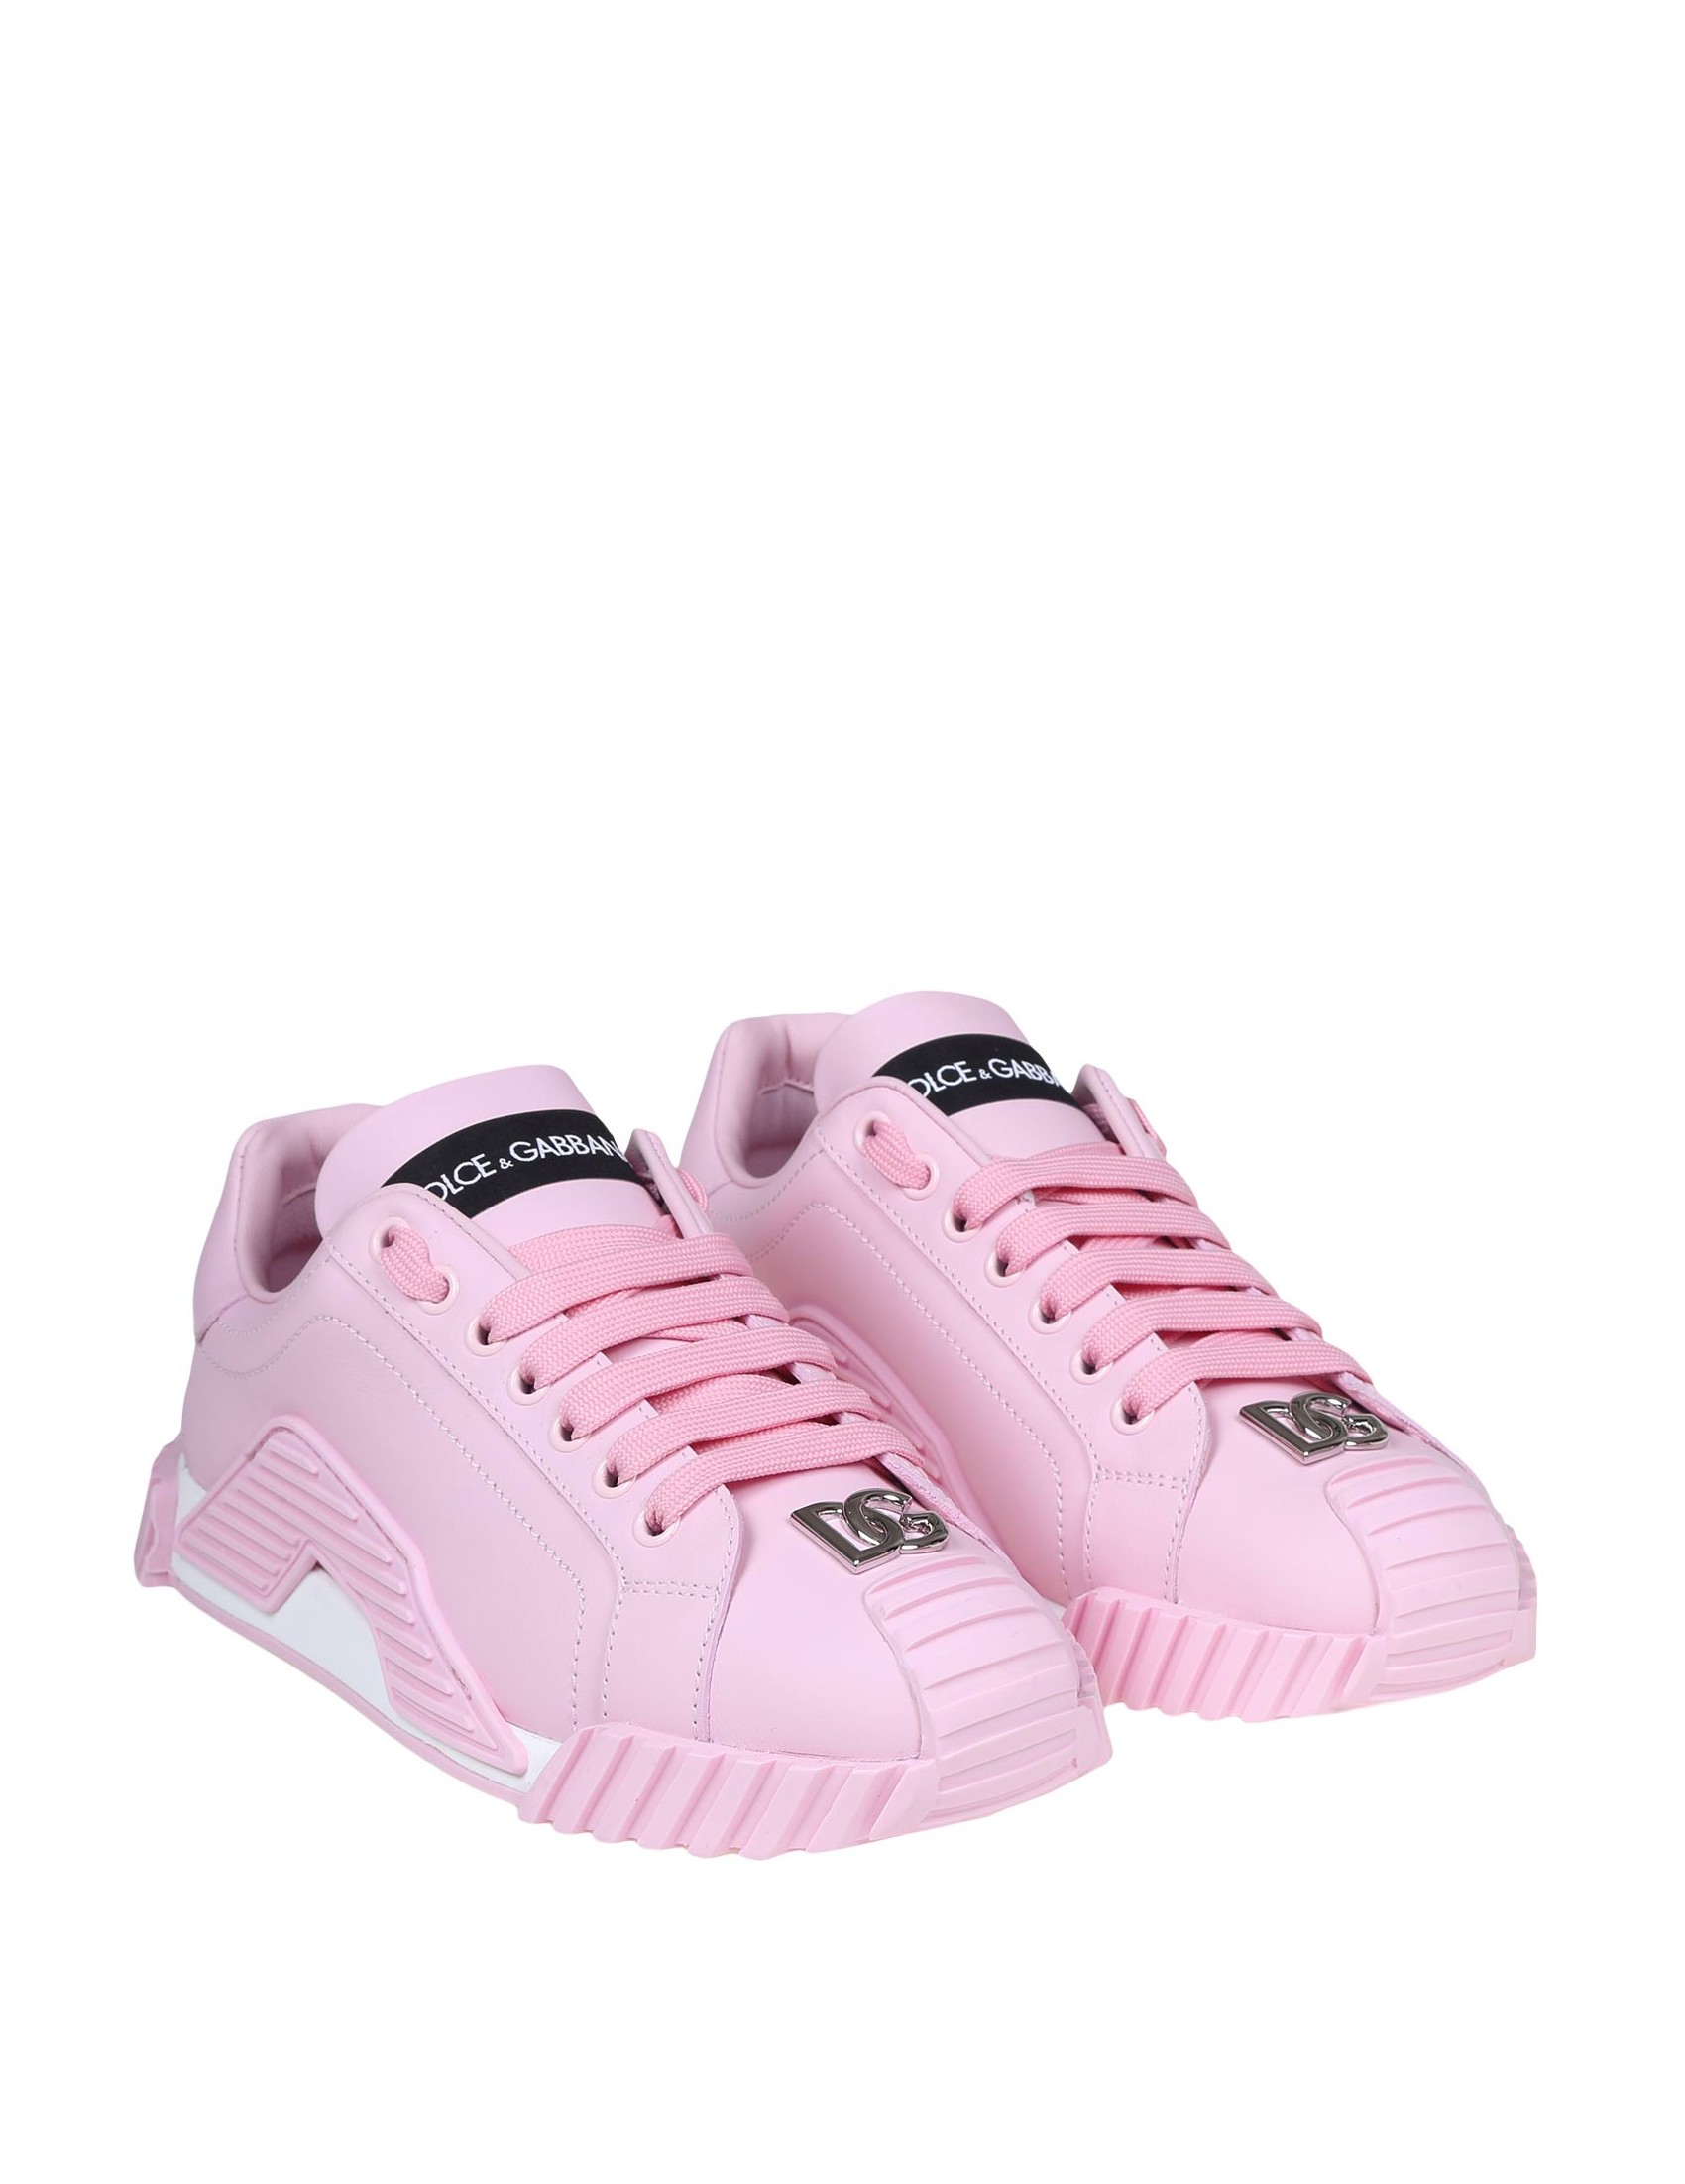 Afstemning Ære bassin DOLCE & GABBANA SNEAKERS IN PINK COLOR LEATHER